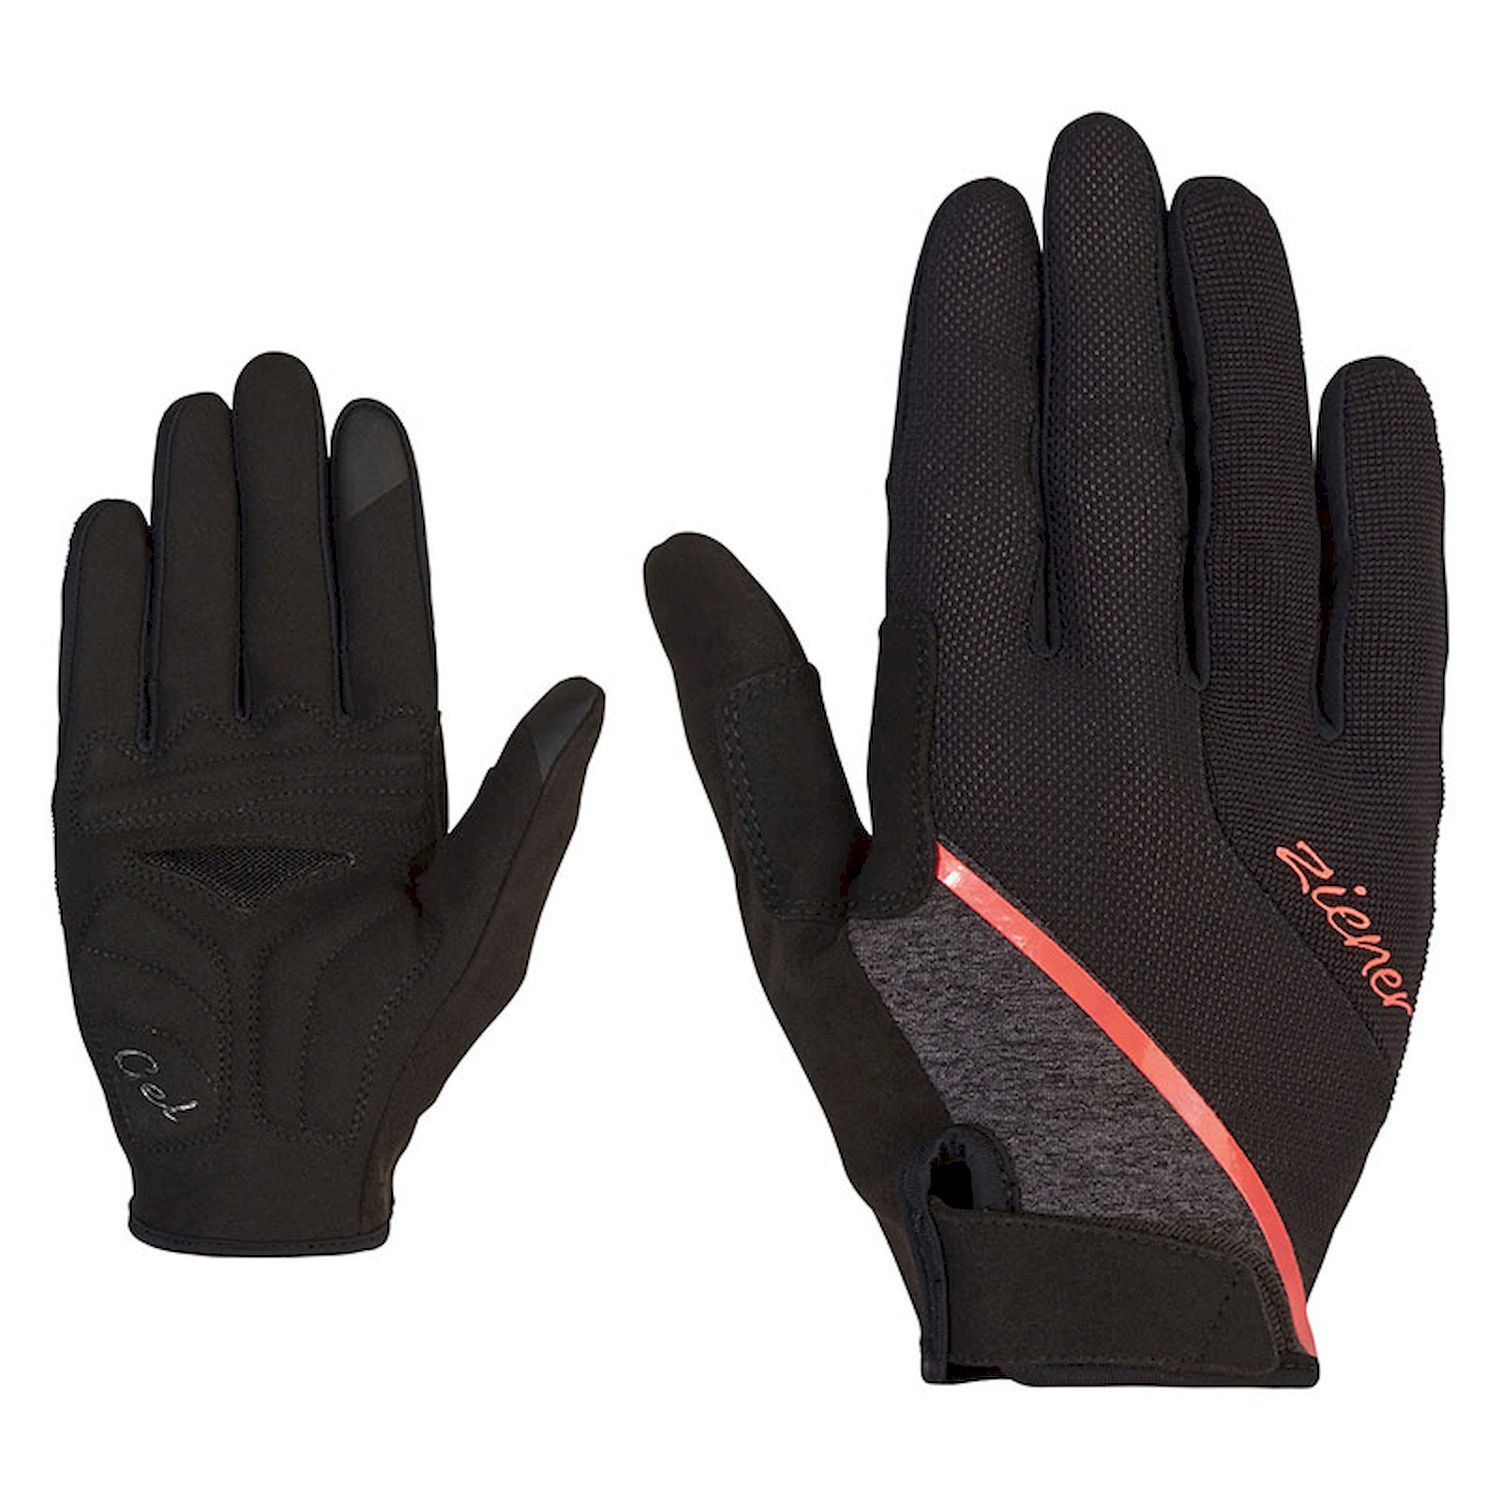 Ziener Calyta Touch Long Lady - Cycling gloves - Women's